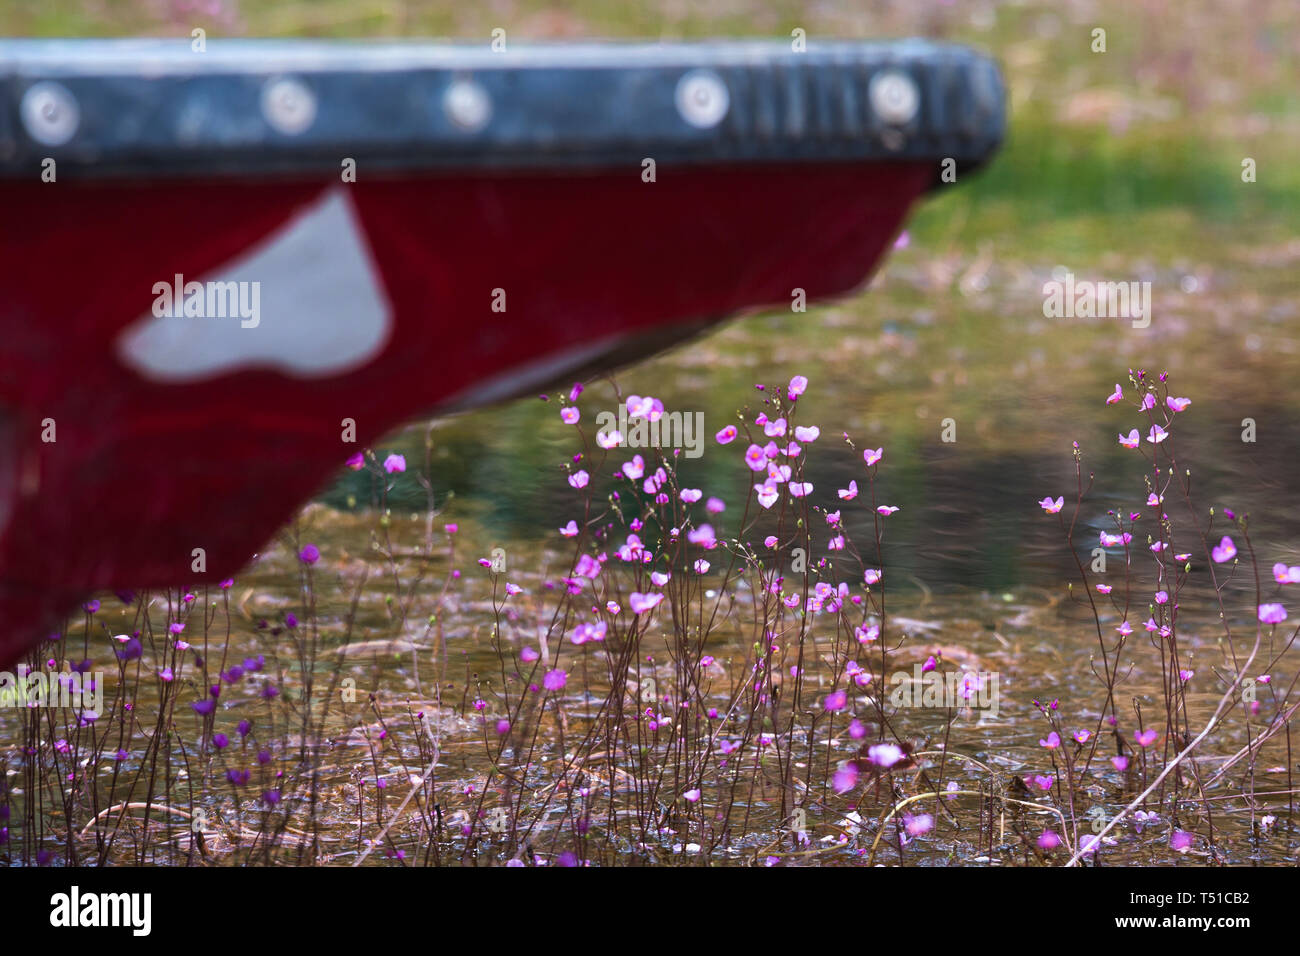 Tram Chim Nature Reserve, Dong Thap Province, Vietnam - March 18, 2017 : Image of a farmer happy couple are boating on a canal full of pink ultricular Stock Photo